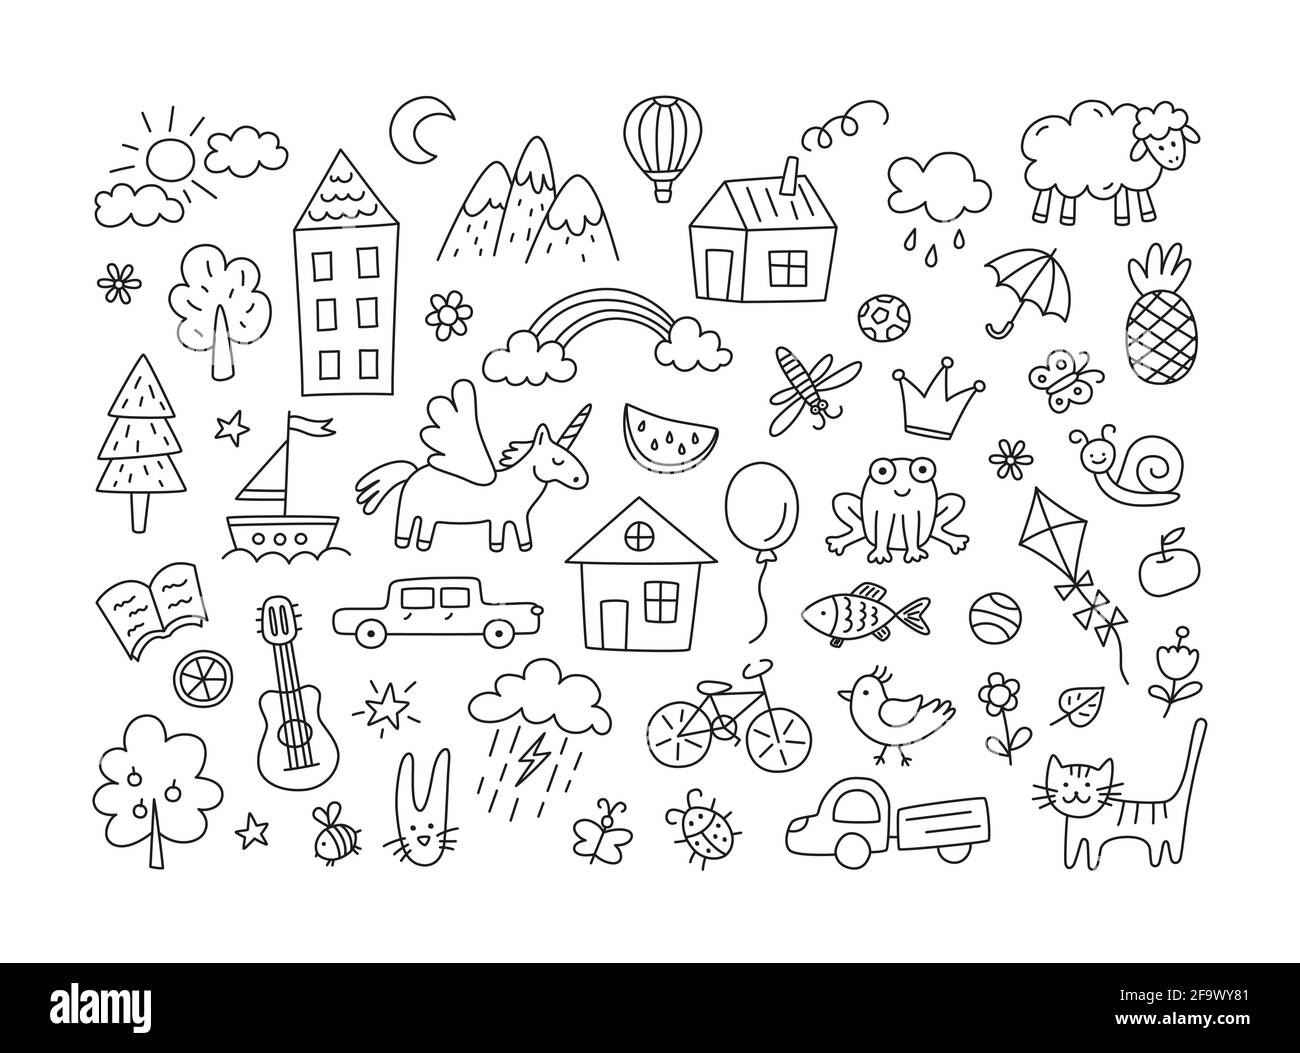 25 Cute and Easy Doodles to Draw | Simple doodles, Cute easy doodles, Easy doodles  drawings